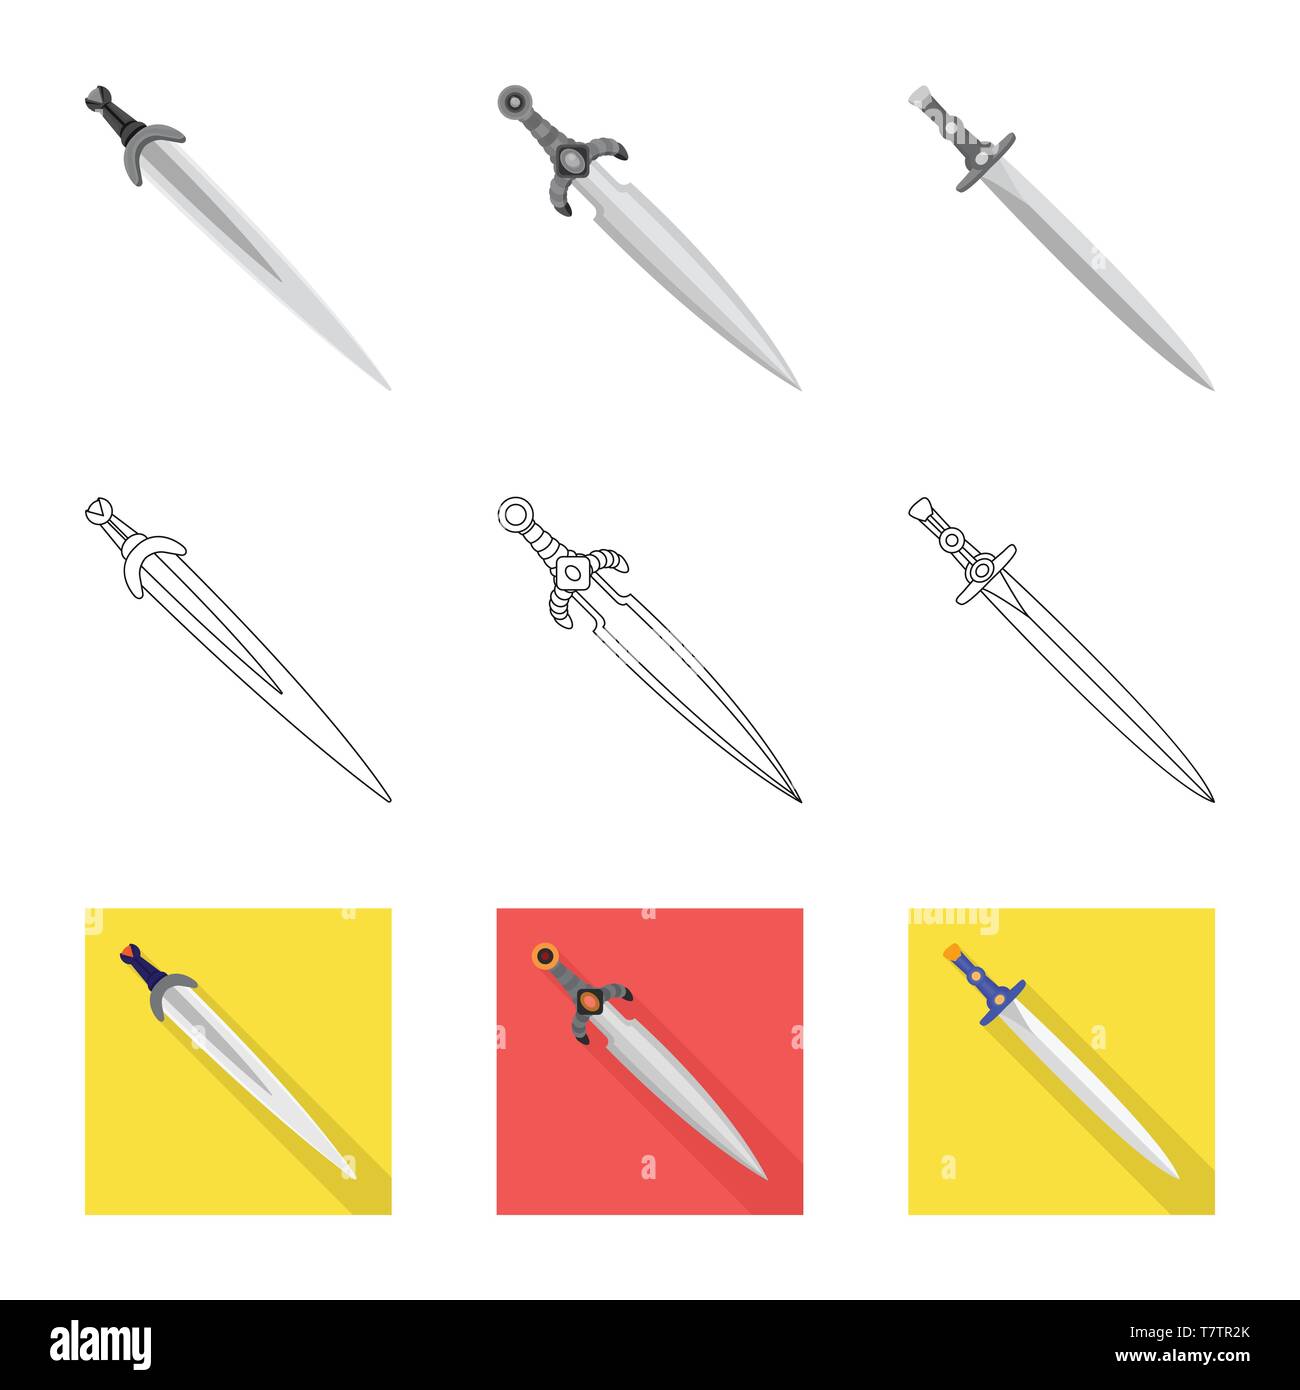 power,Spanish,longsword,handle,hilt,conqueror,decoration,steel,star,silver,gold,ornament,murder,copper,soldier,stone,warrior,ruby,military,fantasy,game,armor,sharp,blade,sword,dagger,knife,weapon,saber,medieval,set,vector,icon,illustration,isolated,collection,design,element,graphic,sign, Vector Vectors , Stock Vector